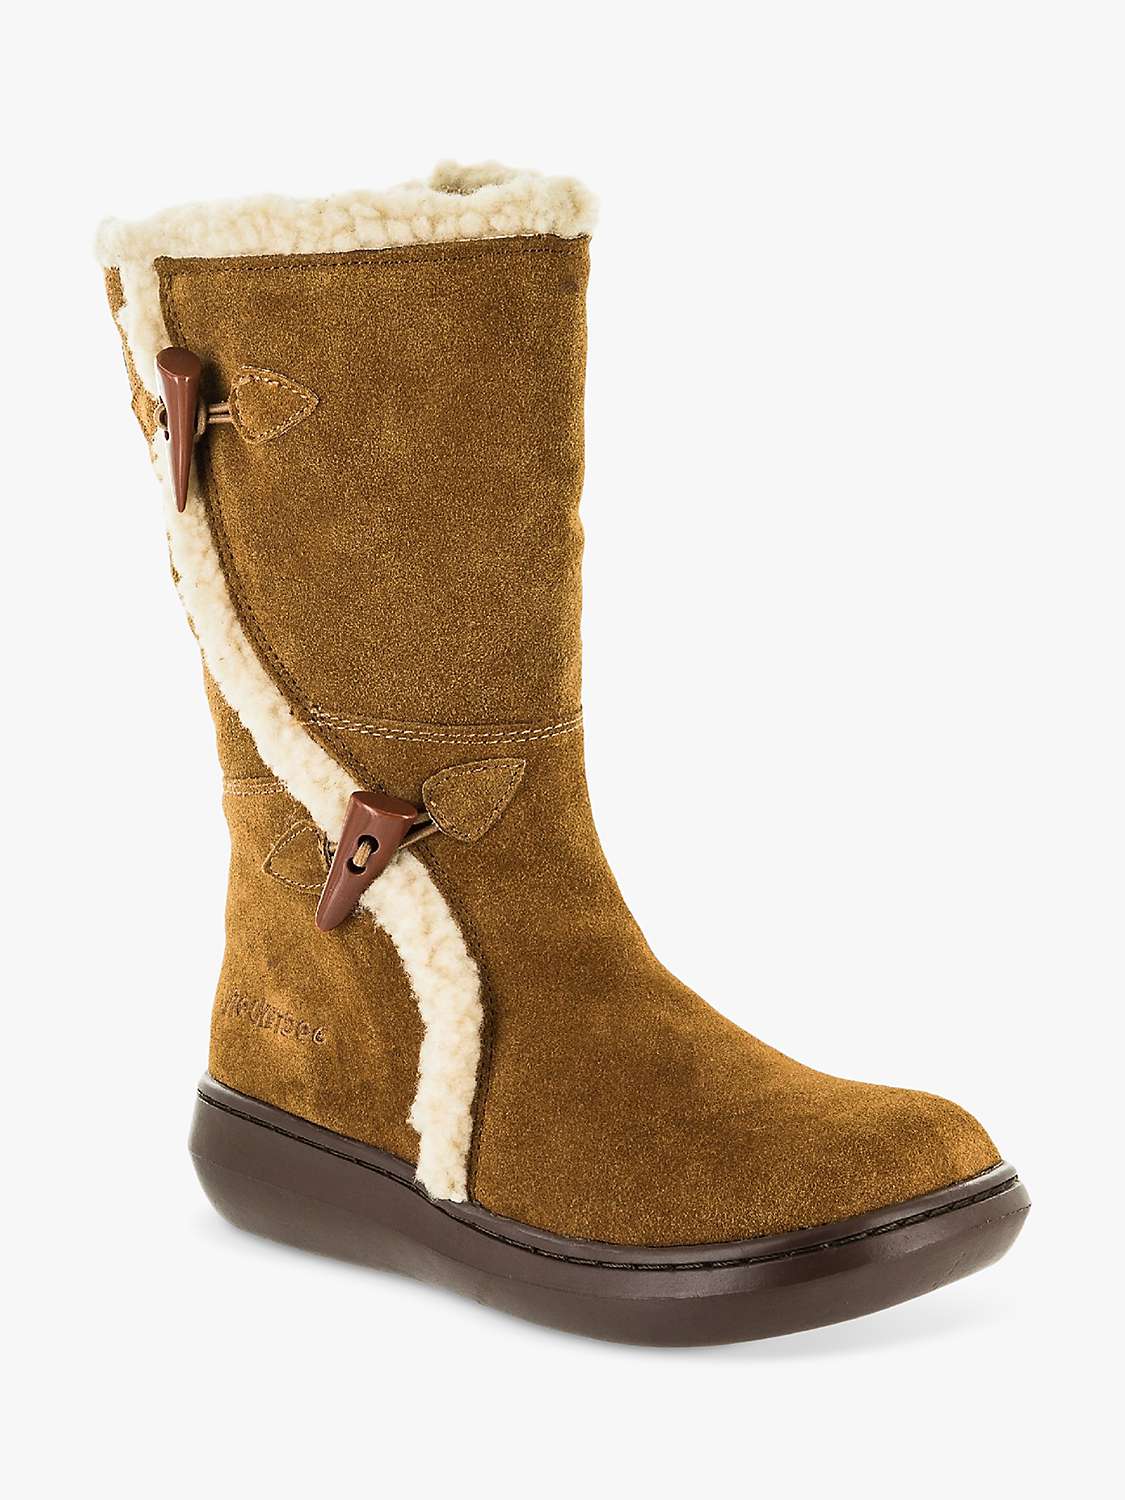 Buy Rocket Dog Slope Suede Faux Shearling Lined Calf Boots Online at johnlewis.com